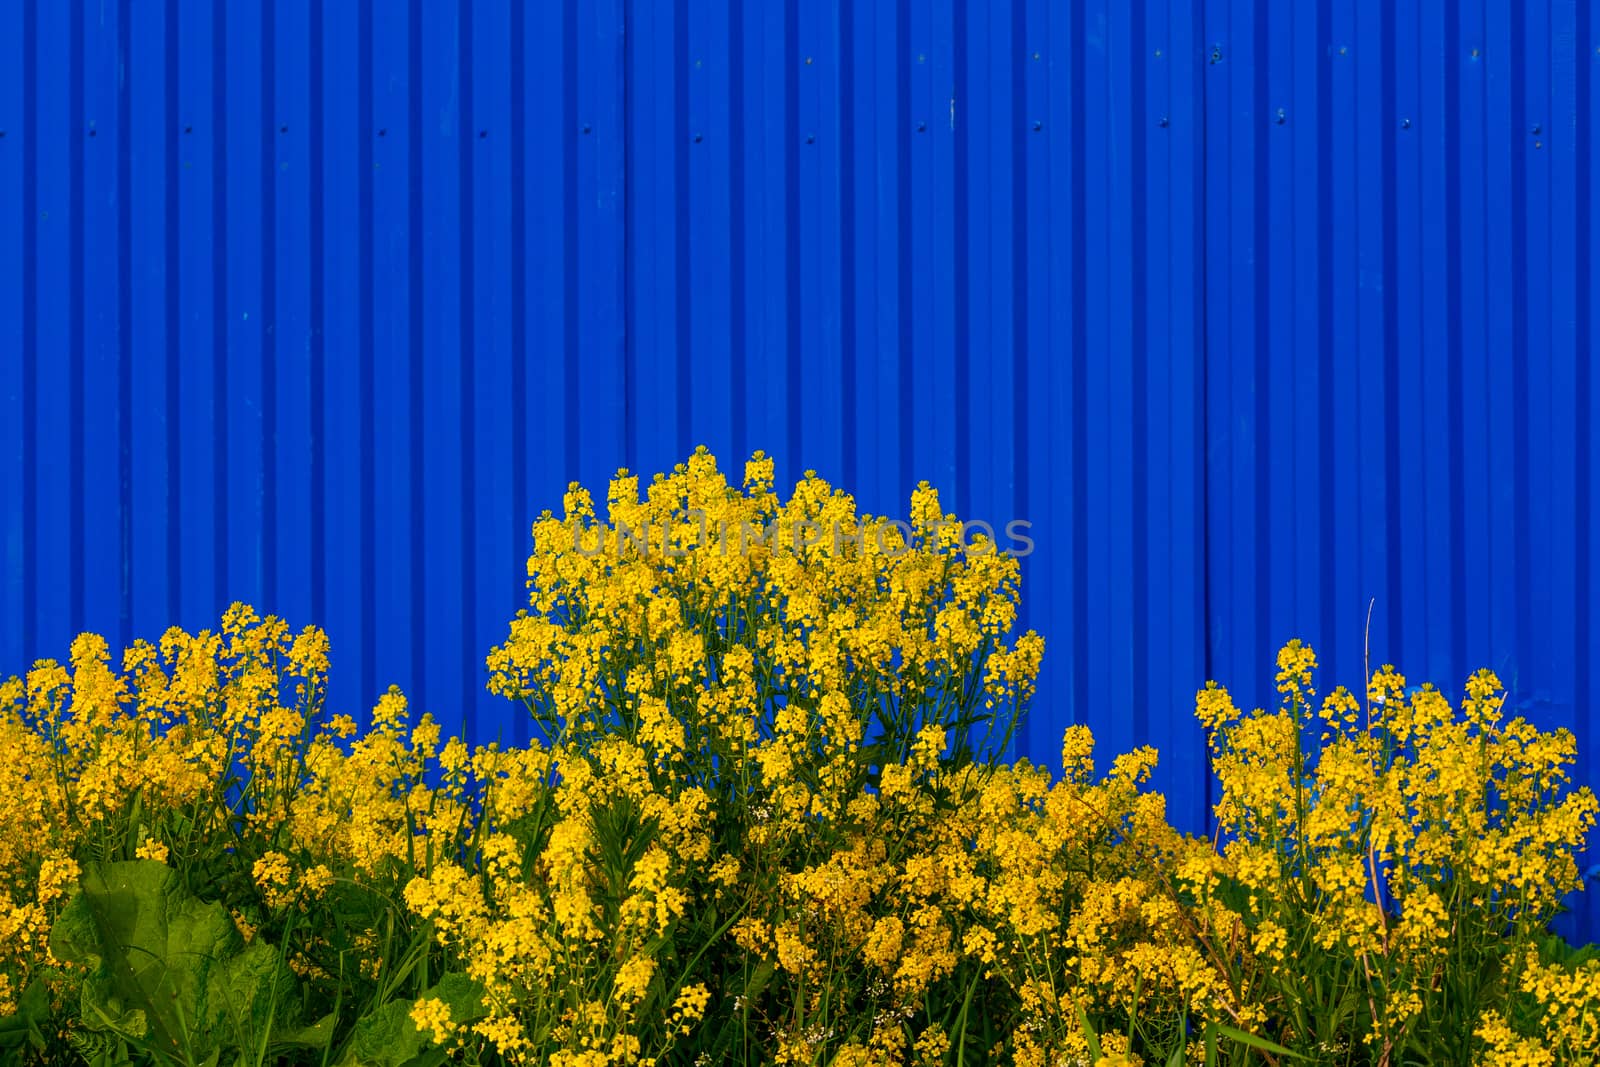 Barbarea vulgaris or Yellow Rocket or Garden yellowrocket flowers on blurry blue fence background. Strong opposite colors contrast.